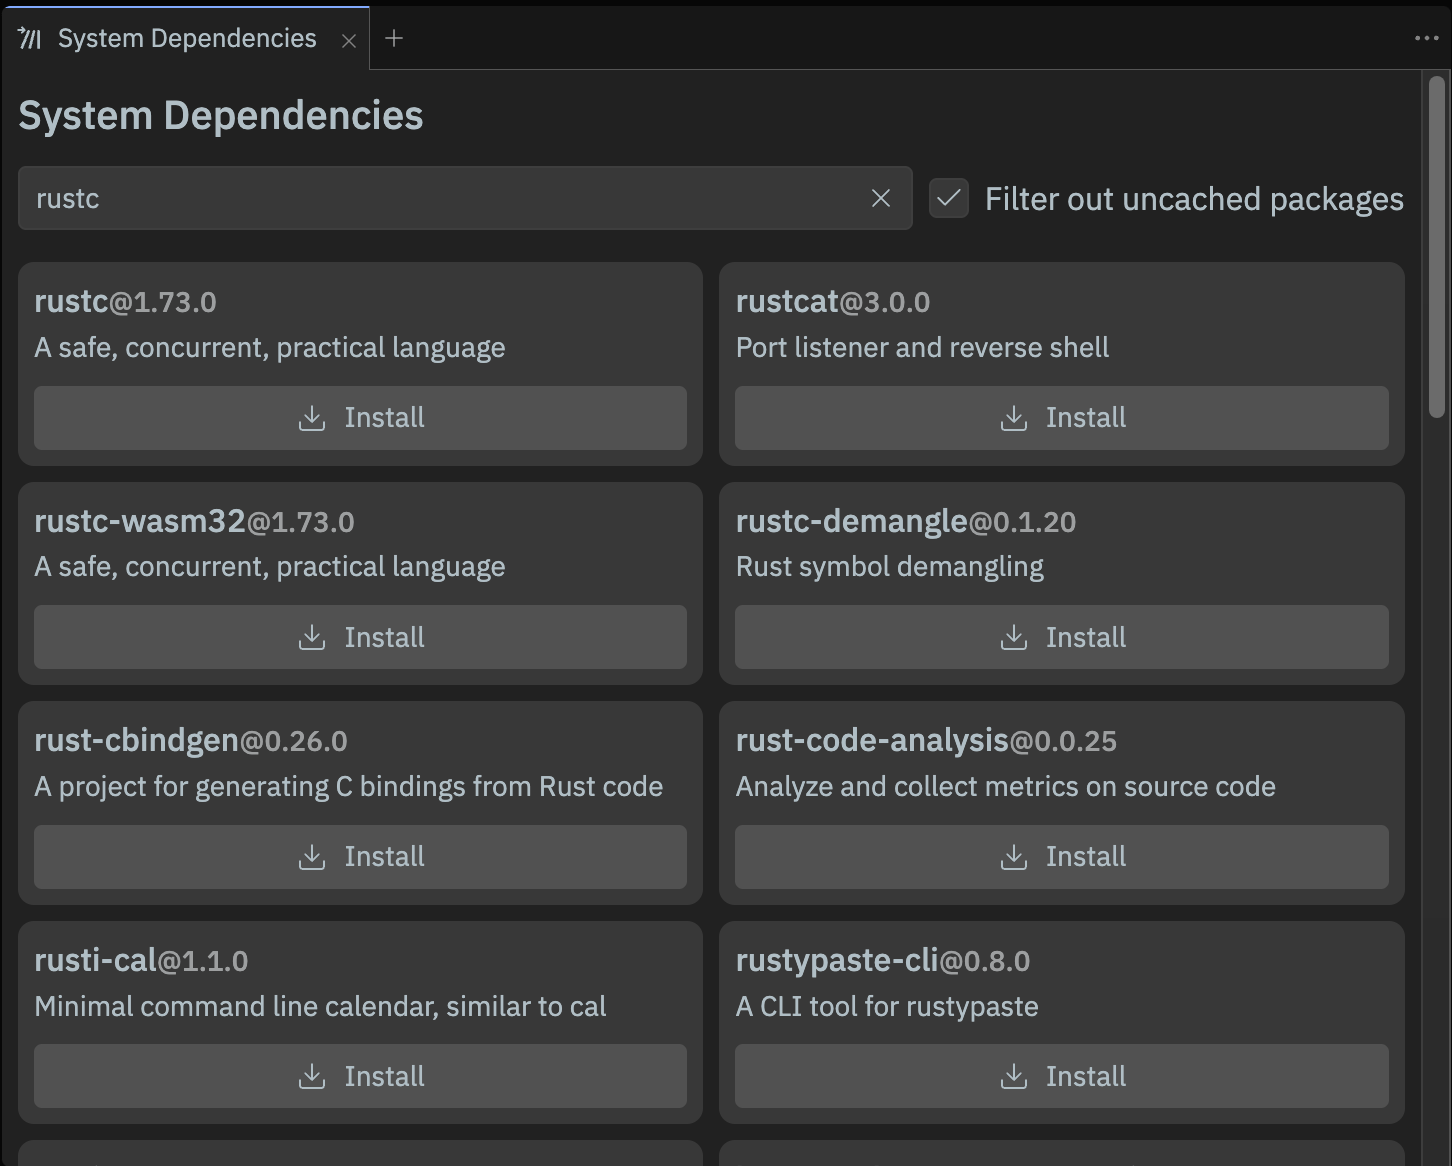 System dependencies search